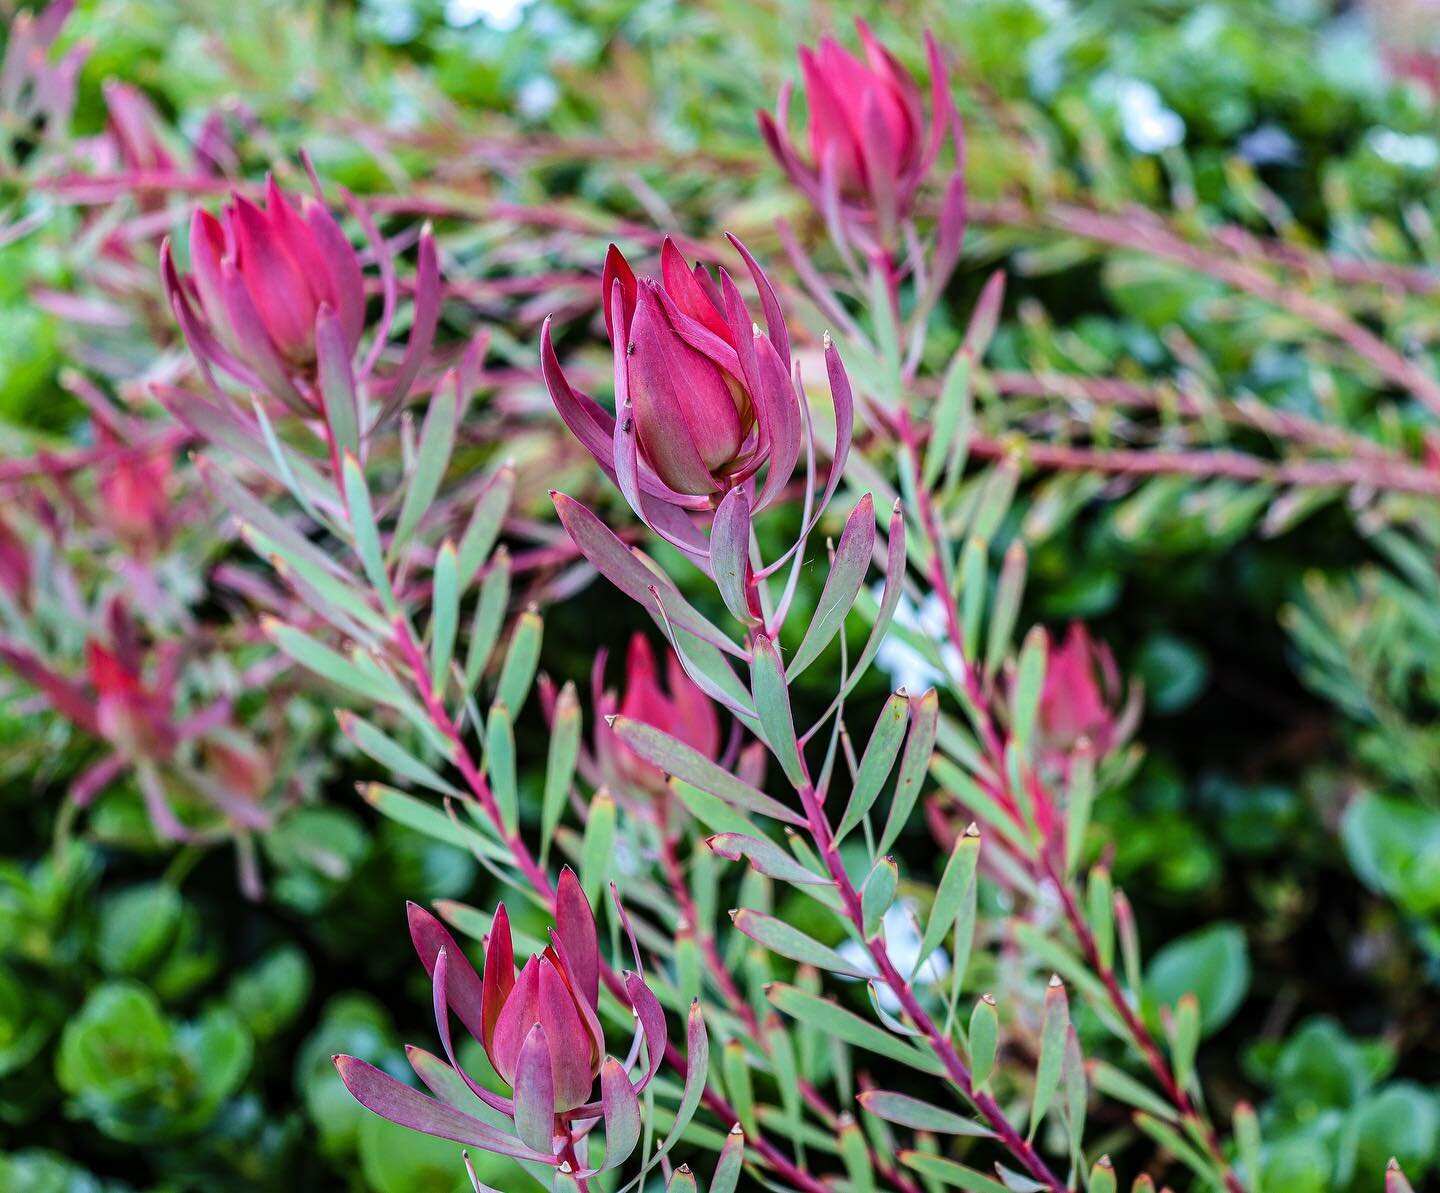 ⛰ Sth African Native Species⛰

Proteaceae. A fascinating family of plants, predominantly distributed throughout the Southern Hemisphere.

One of my favourites, Leucadendron salignum &lsquo;Safari Sunset&rsquo; (Conebush) a dazzlingly striking deep re